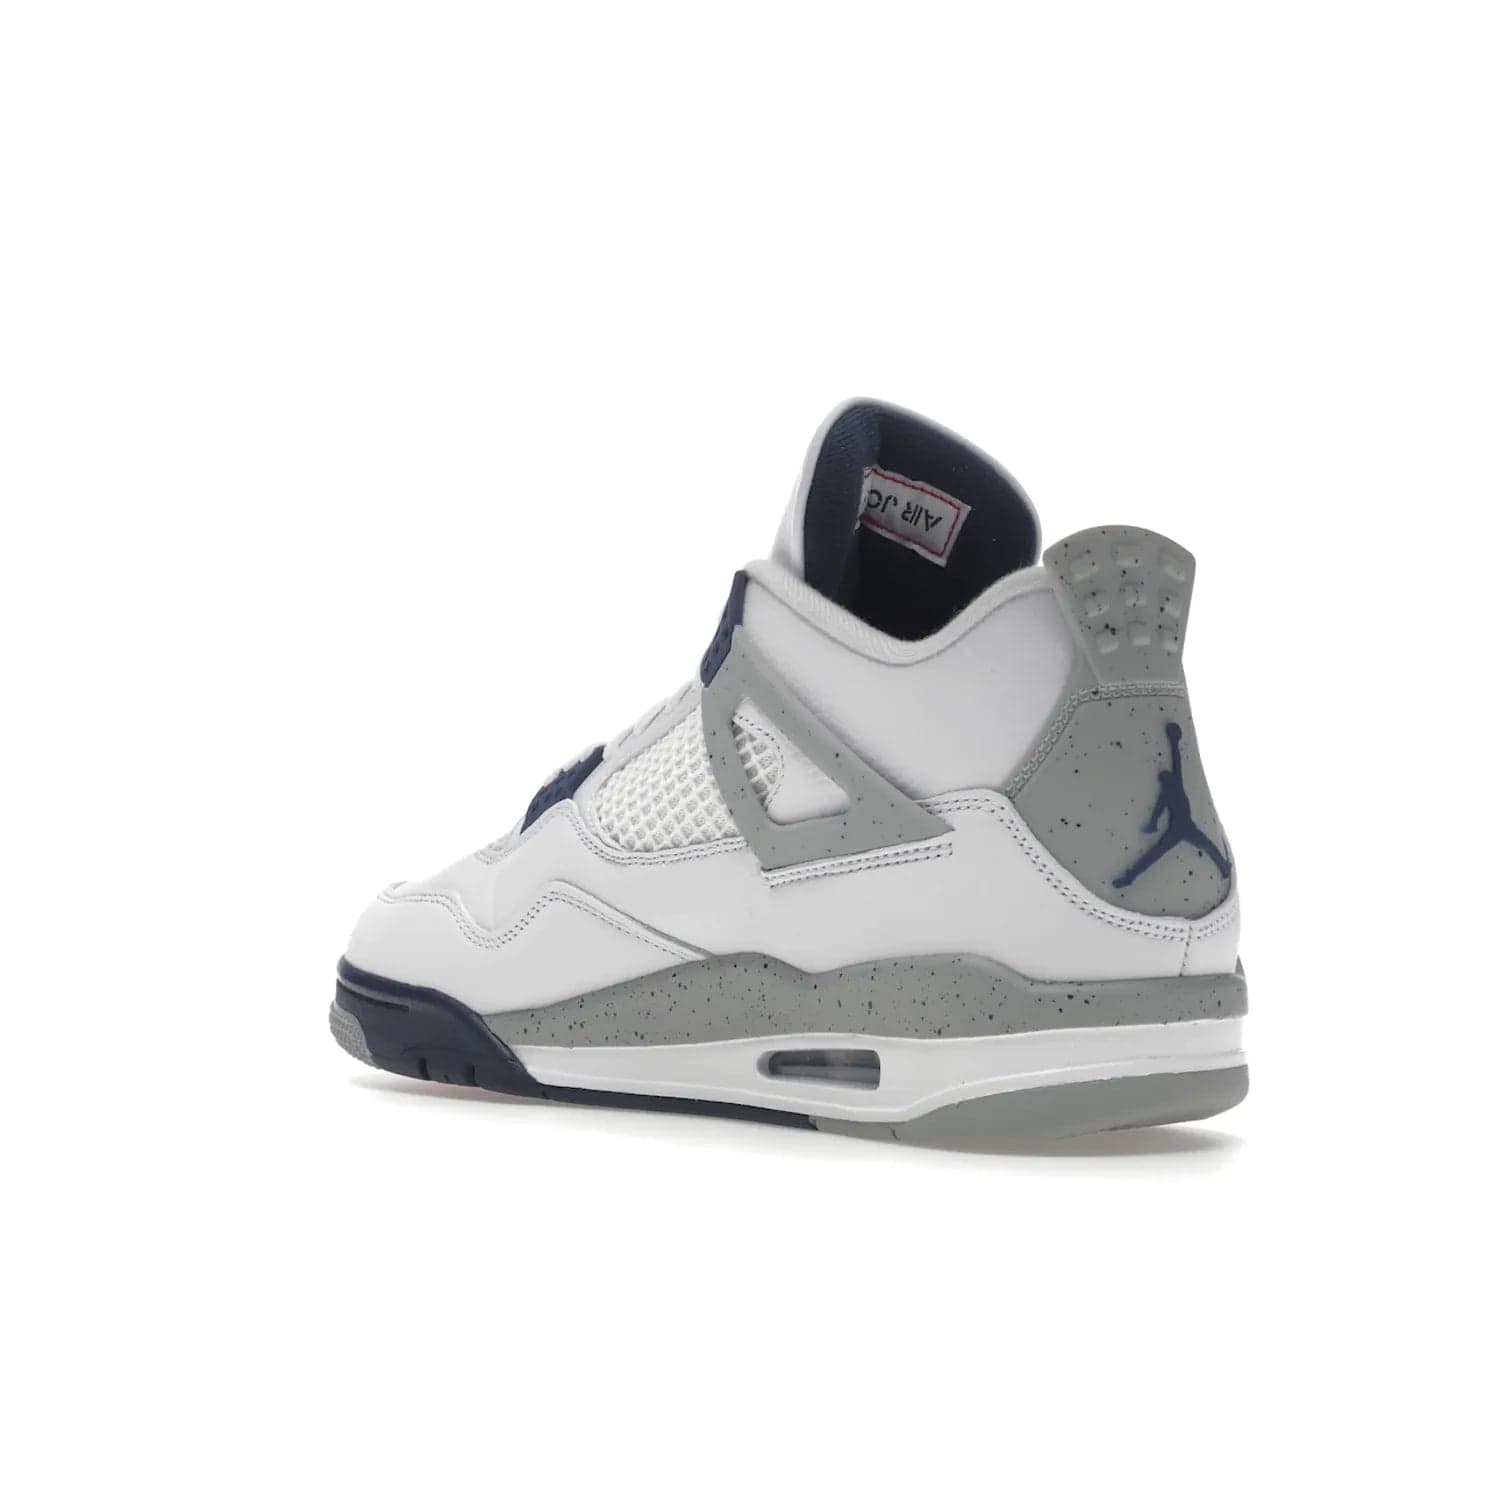 Jordan 4 Retro Midnight Navy - Image 24 - Only at www.BallersClubKickz.com - Shop the Air Jordan Retro 4 White Midnight Navy. Stand out with a classic white leather upper, black support wings, midnight navy eyelets, and Crimson Jumpman tongue tag. Unbeatable comfort with two-tone polyurethane midsole with encapsulated Air technology. Get yours before October 29th, 2022.